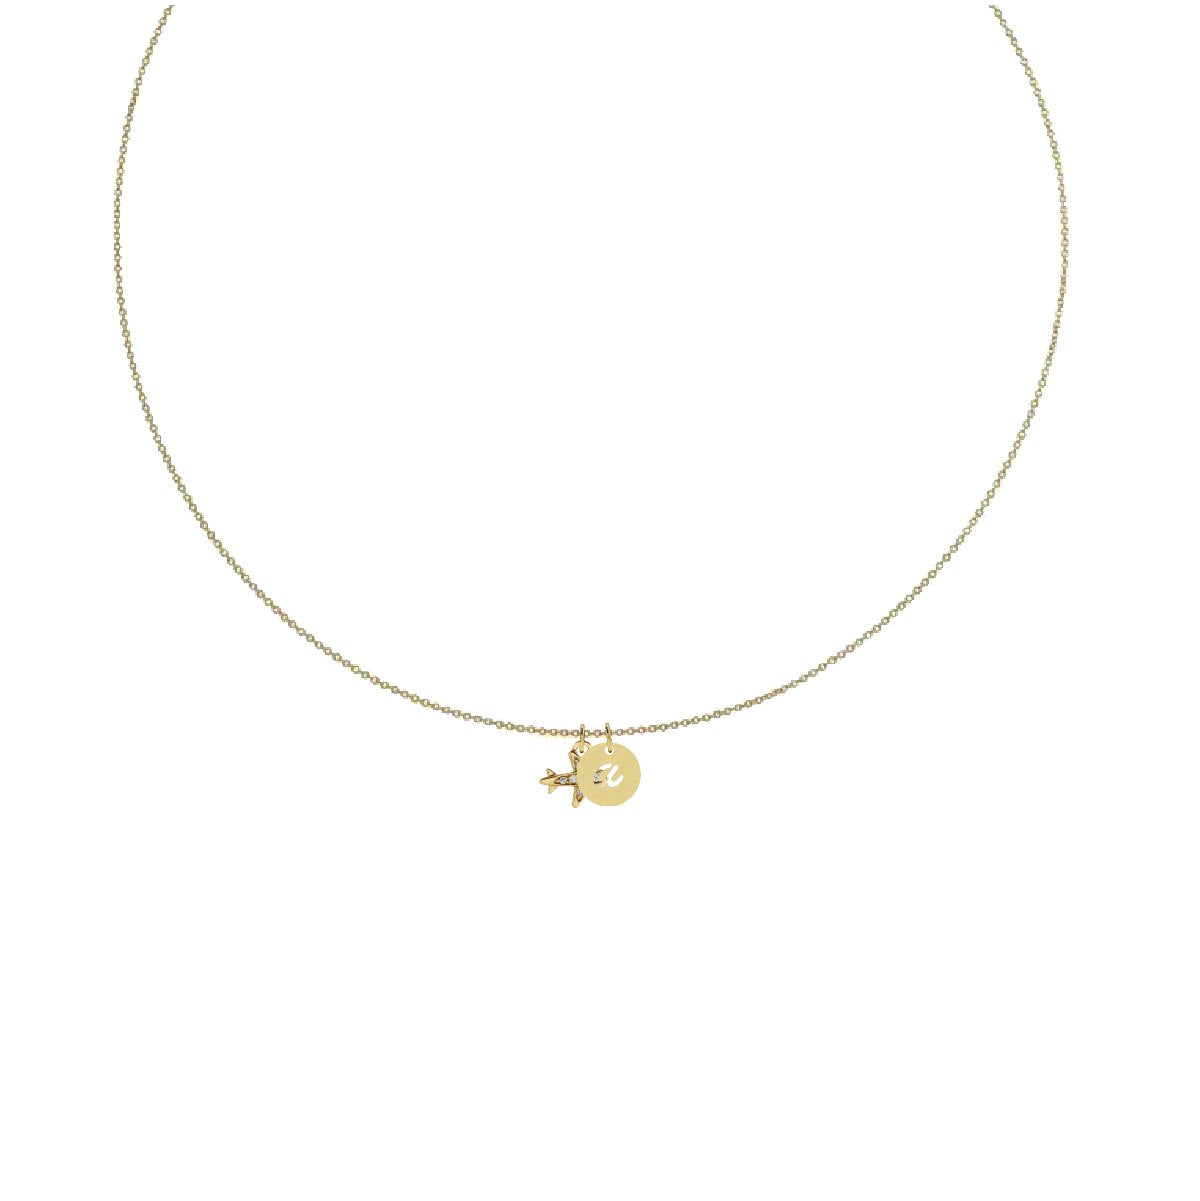 Charm Collection - For the Jet Setter Robyn Canady Charm + 14K Gold Filled Chain Add an Initial (Leave initial selection in notes) 